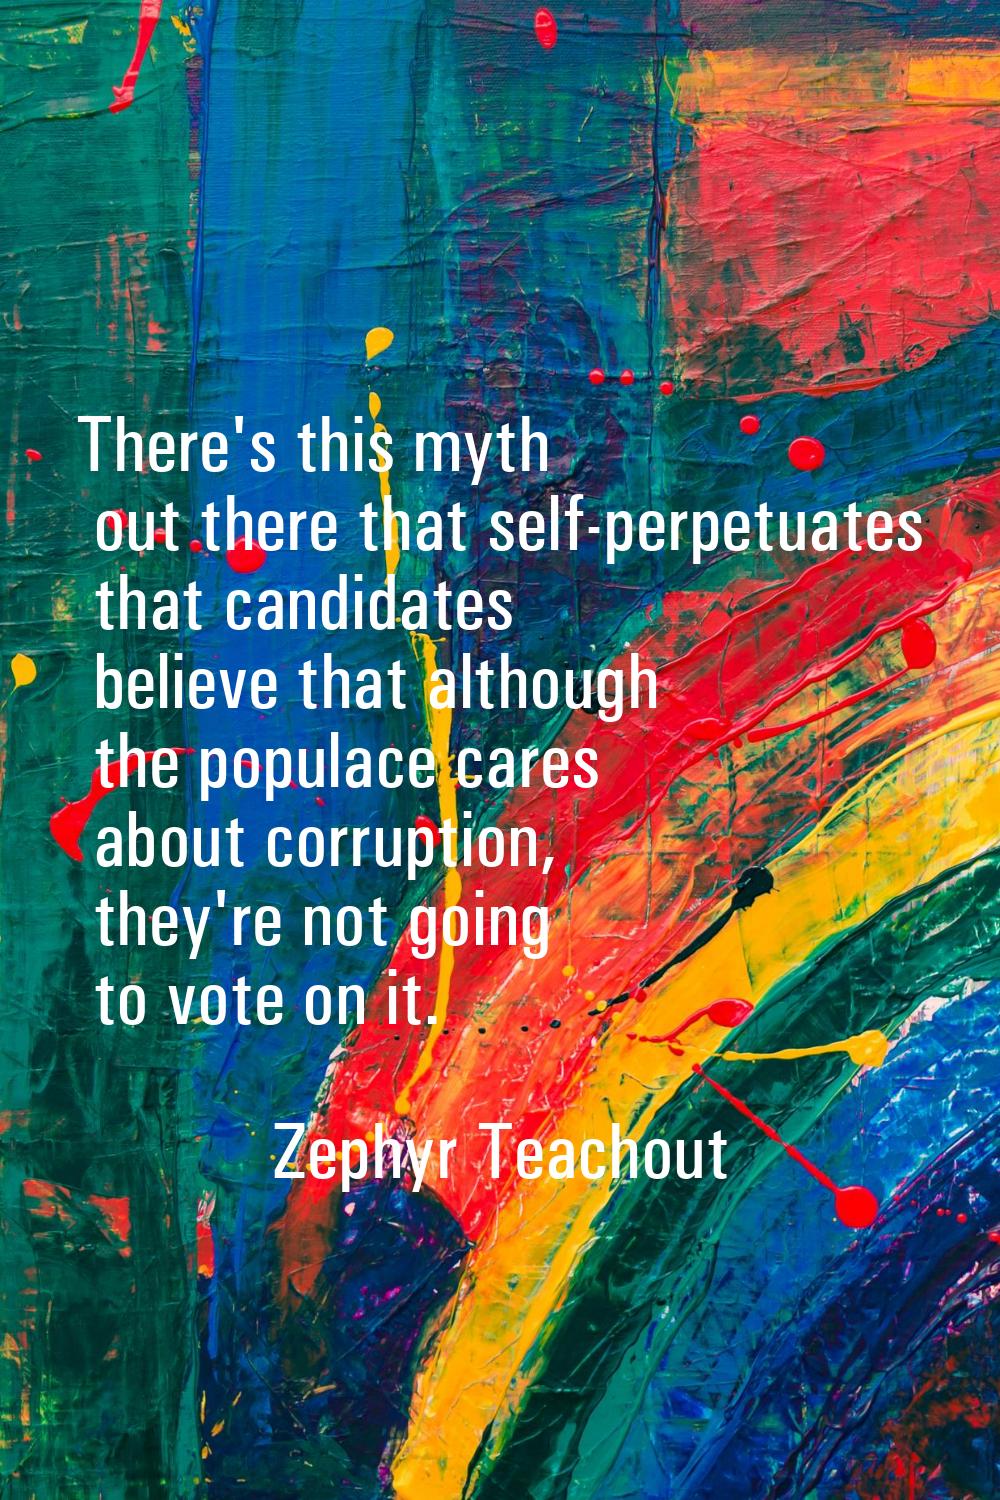 There's this myth out there that self-perpetuates that candidates believe that although the populac